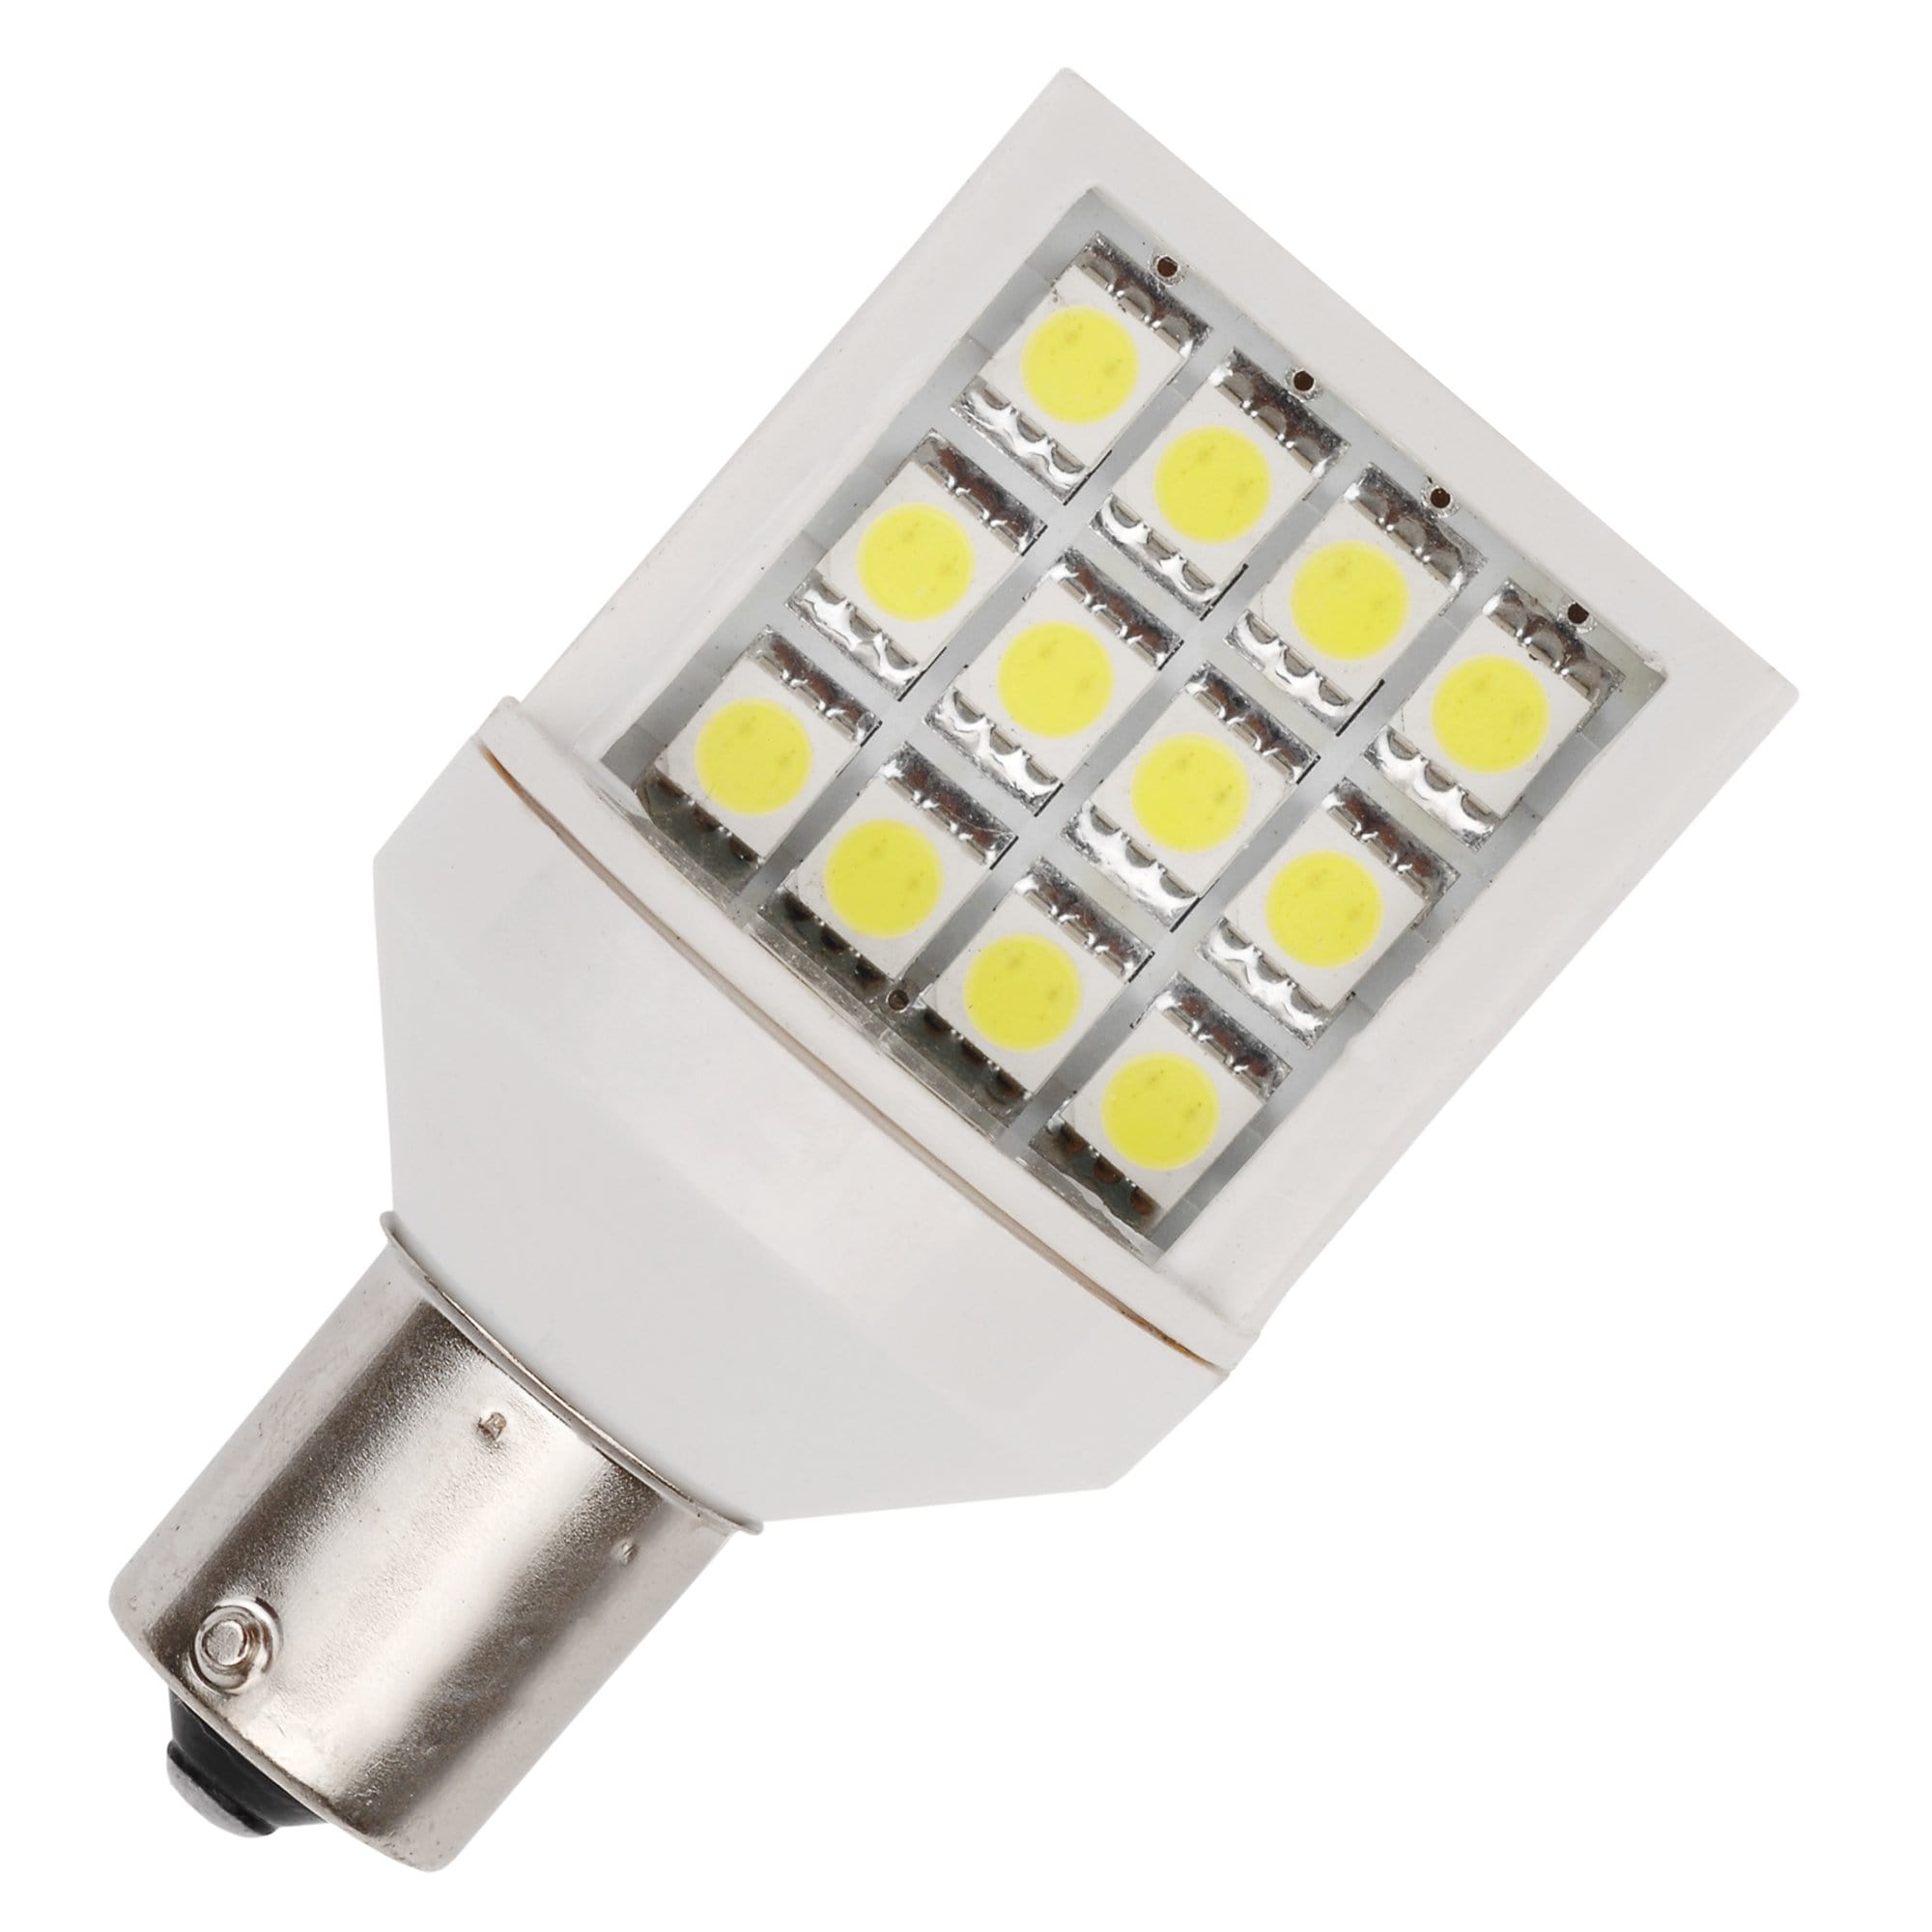 AP Products 016-1141-200 LED Bulb, 200 Lms, Replaces 1003, 1073, 1141